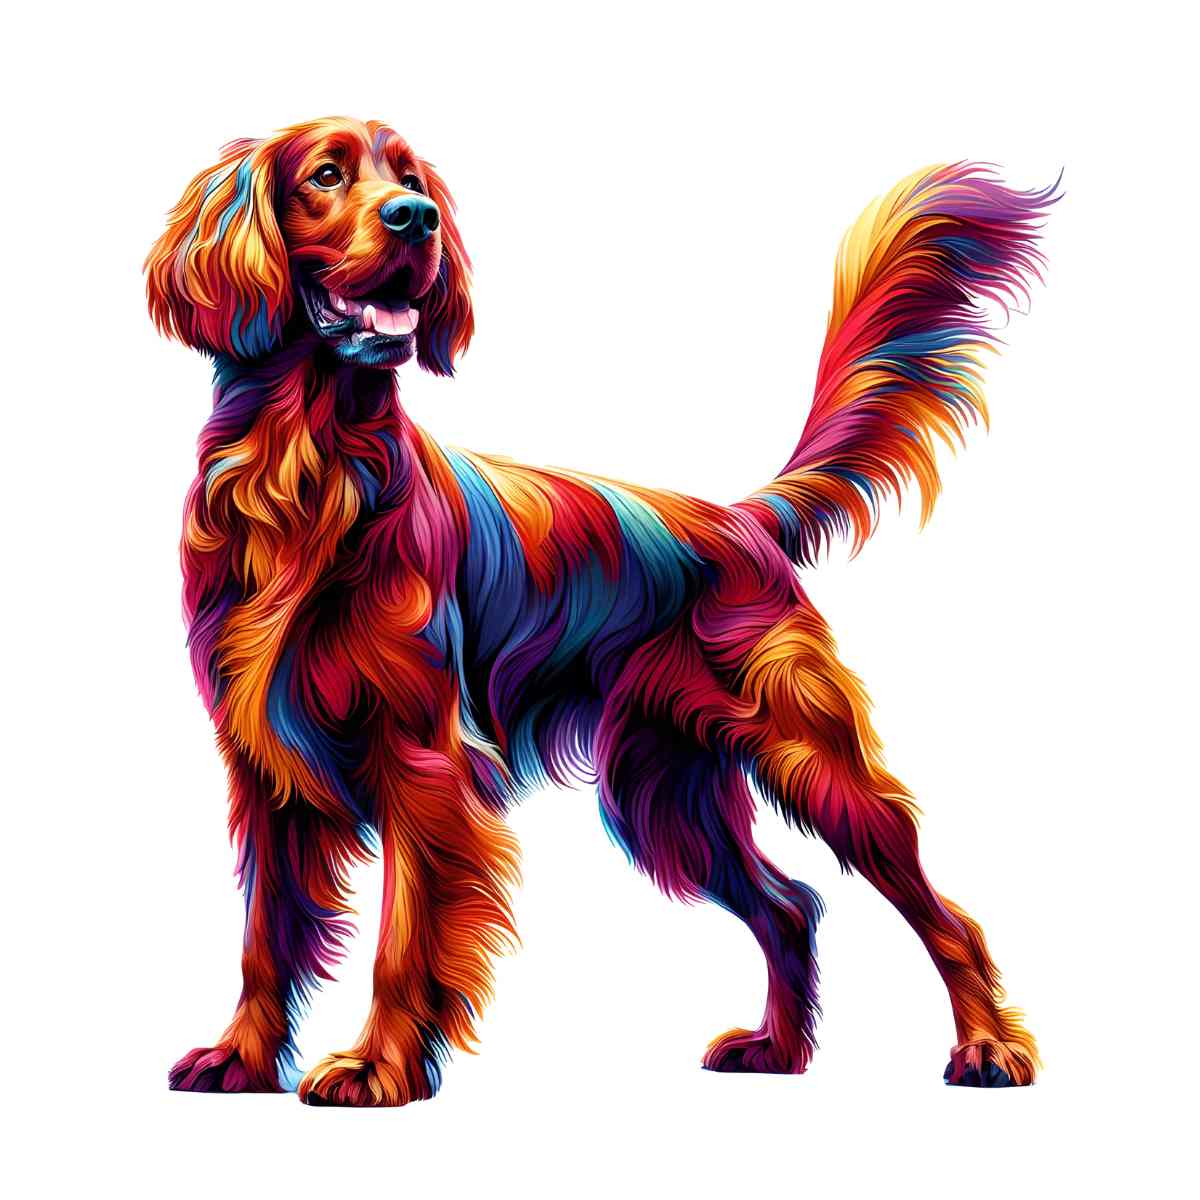 Animal Jigsaw Puzzle > Wooden Jigsaw Puzzle > Jigsaw Puzzle A4 Red Setter / Irish Setter Dog - Jigsaw Puzzle